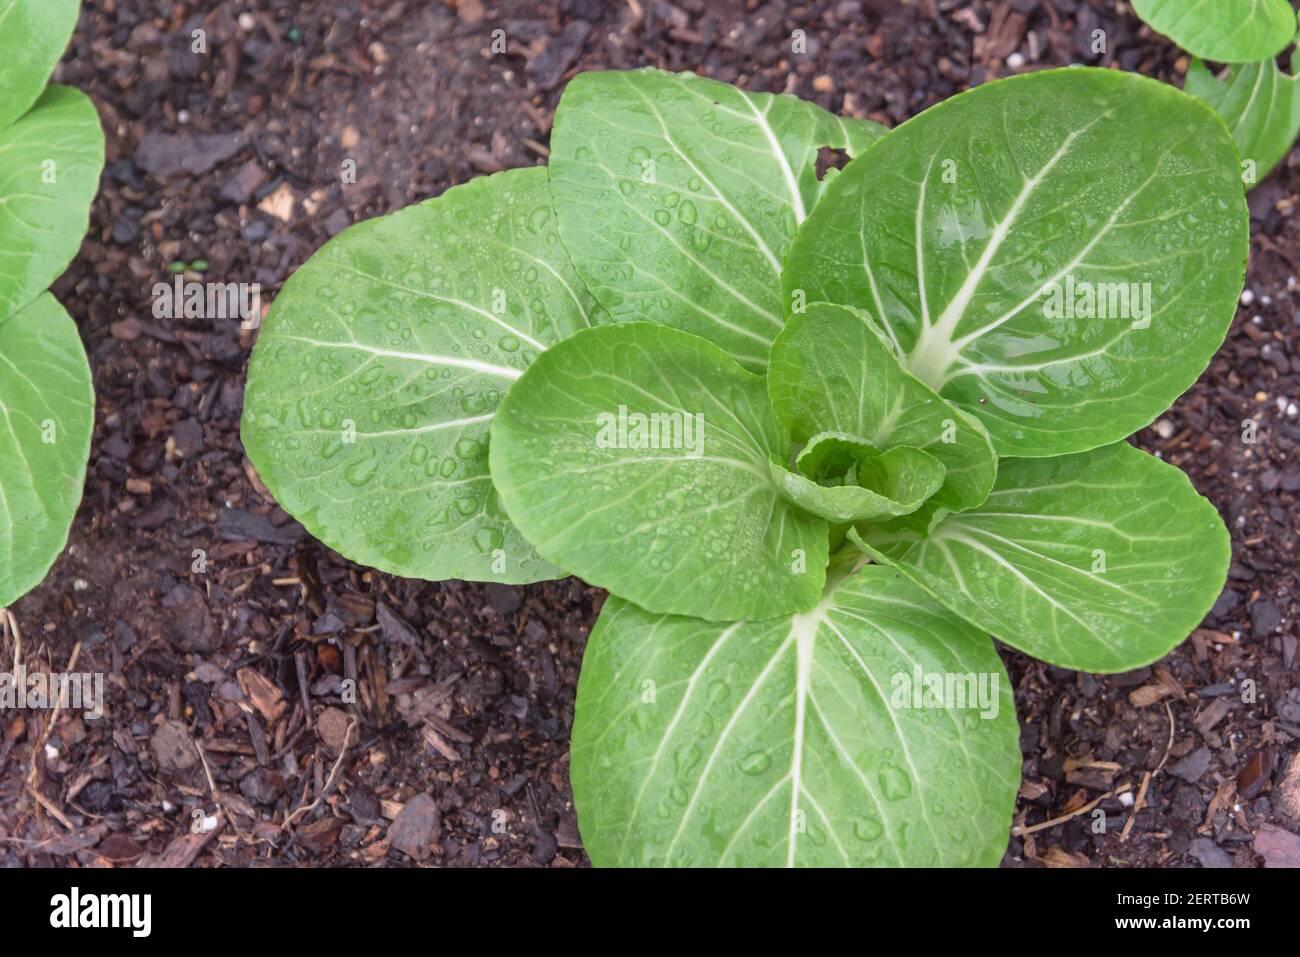 Large head of bok choy leafy greens with water drop cultivated at backyard garden in Texas, USA Stock Photo